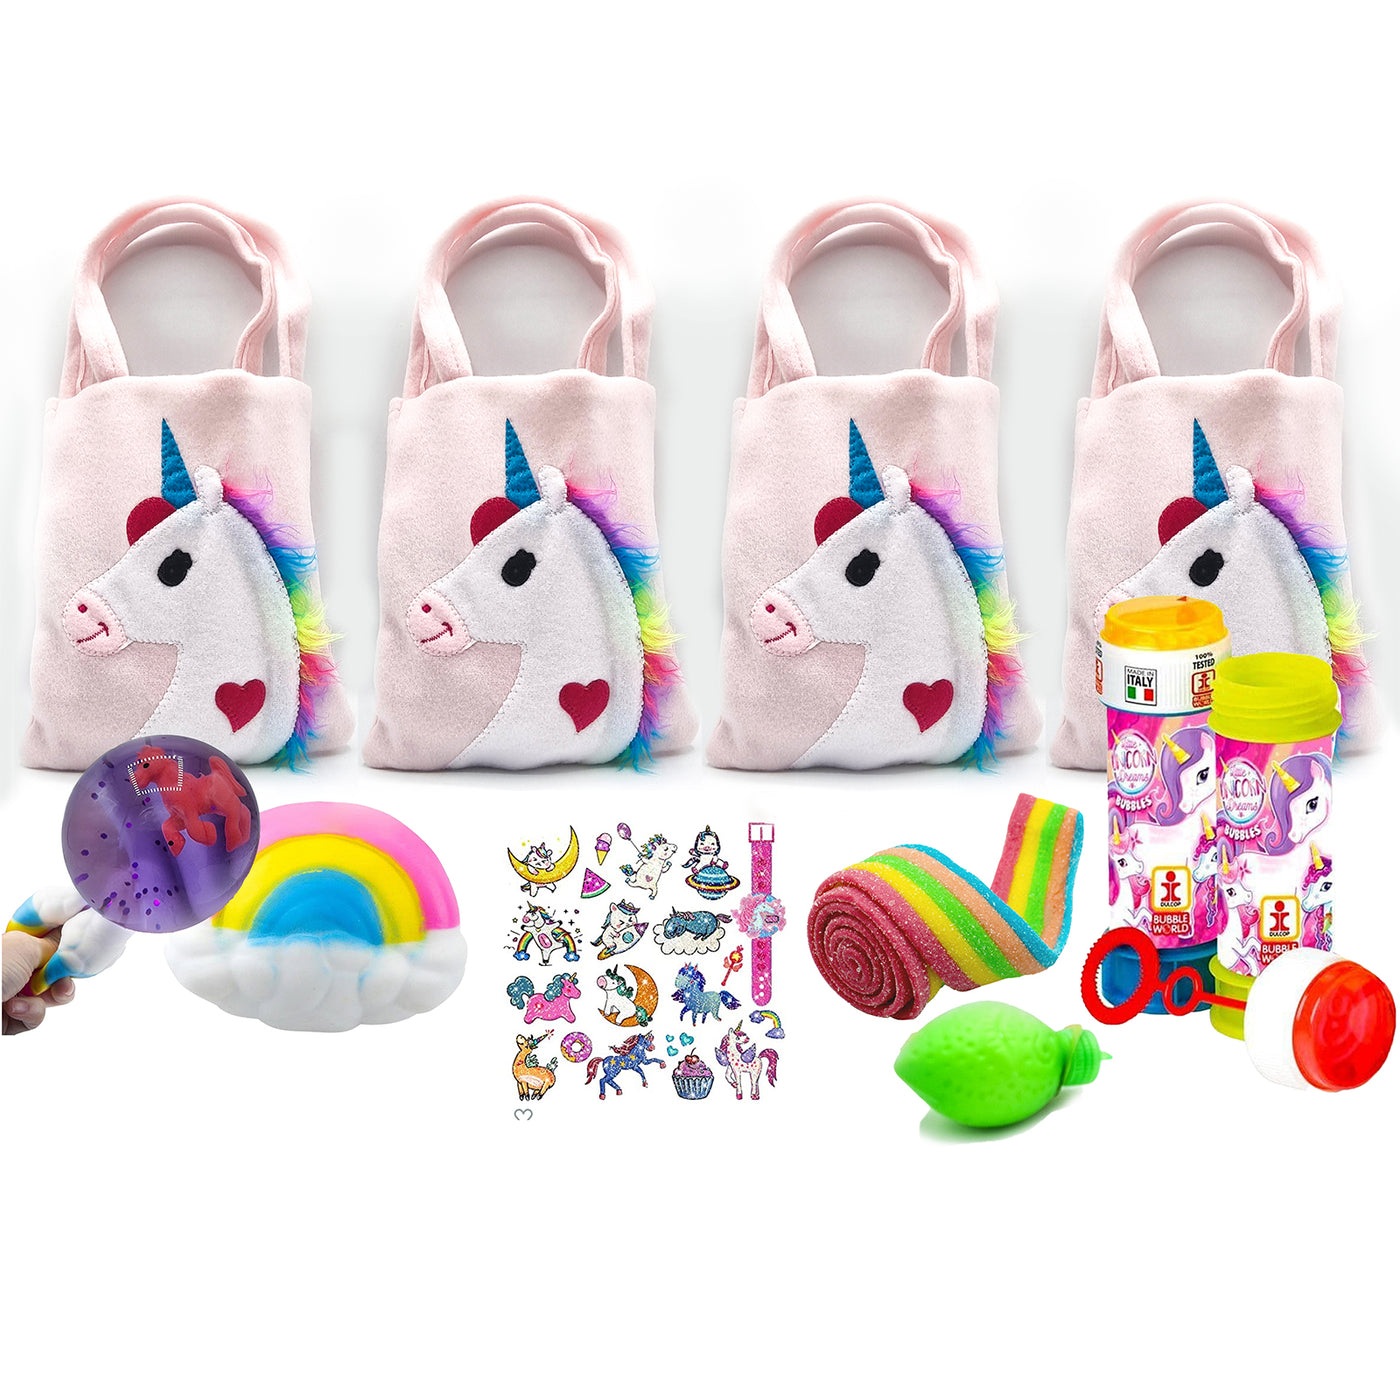 Pre Filled Rainbow Birthday Unicorn Party Goody Bags With Toys And Sweets.